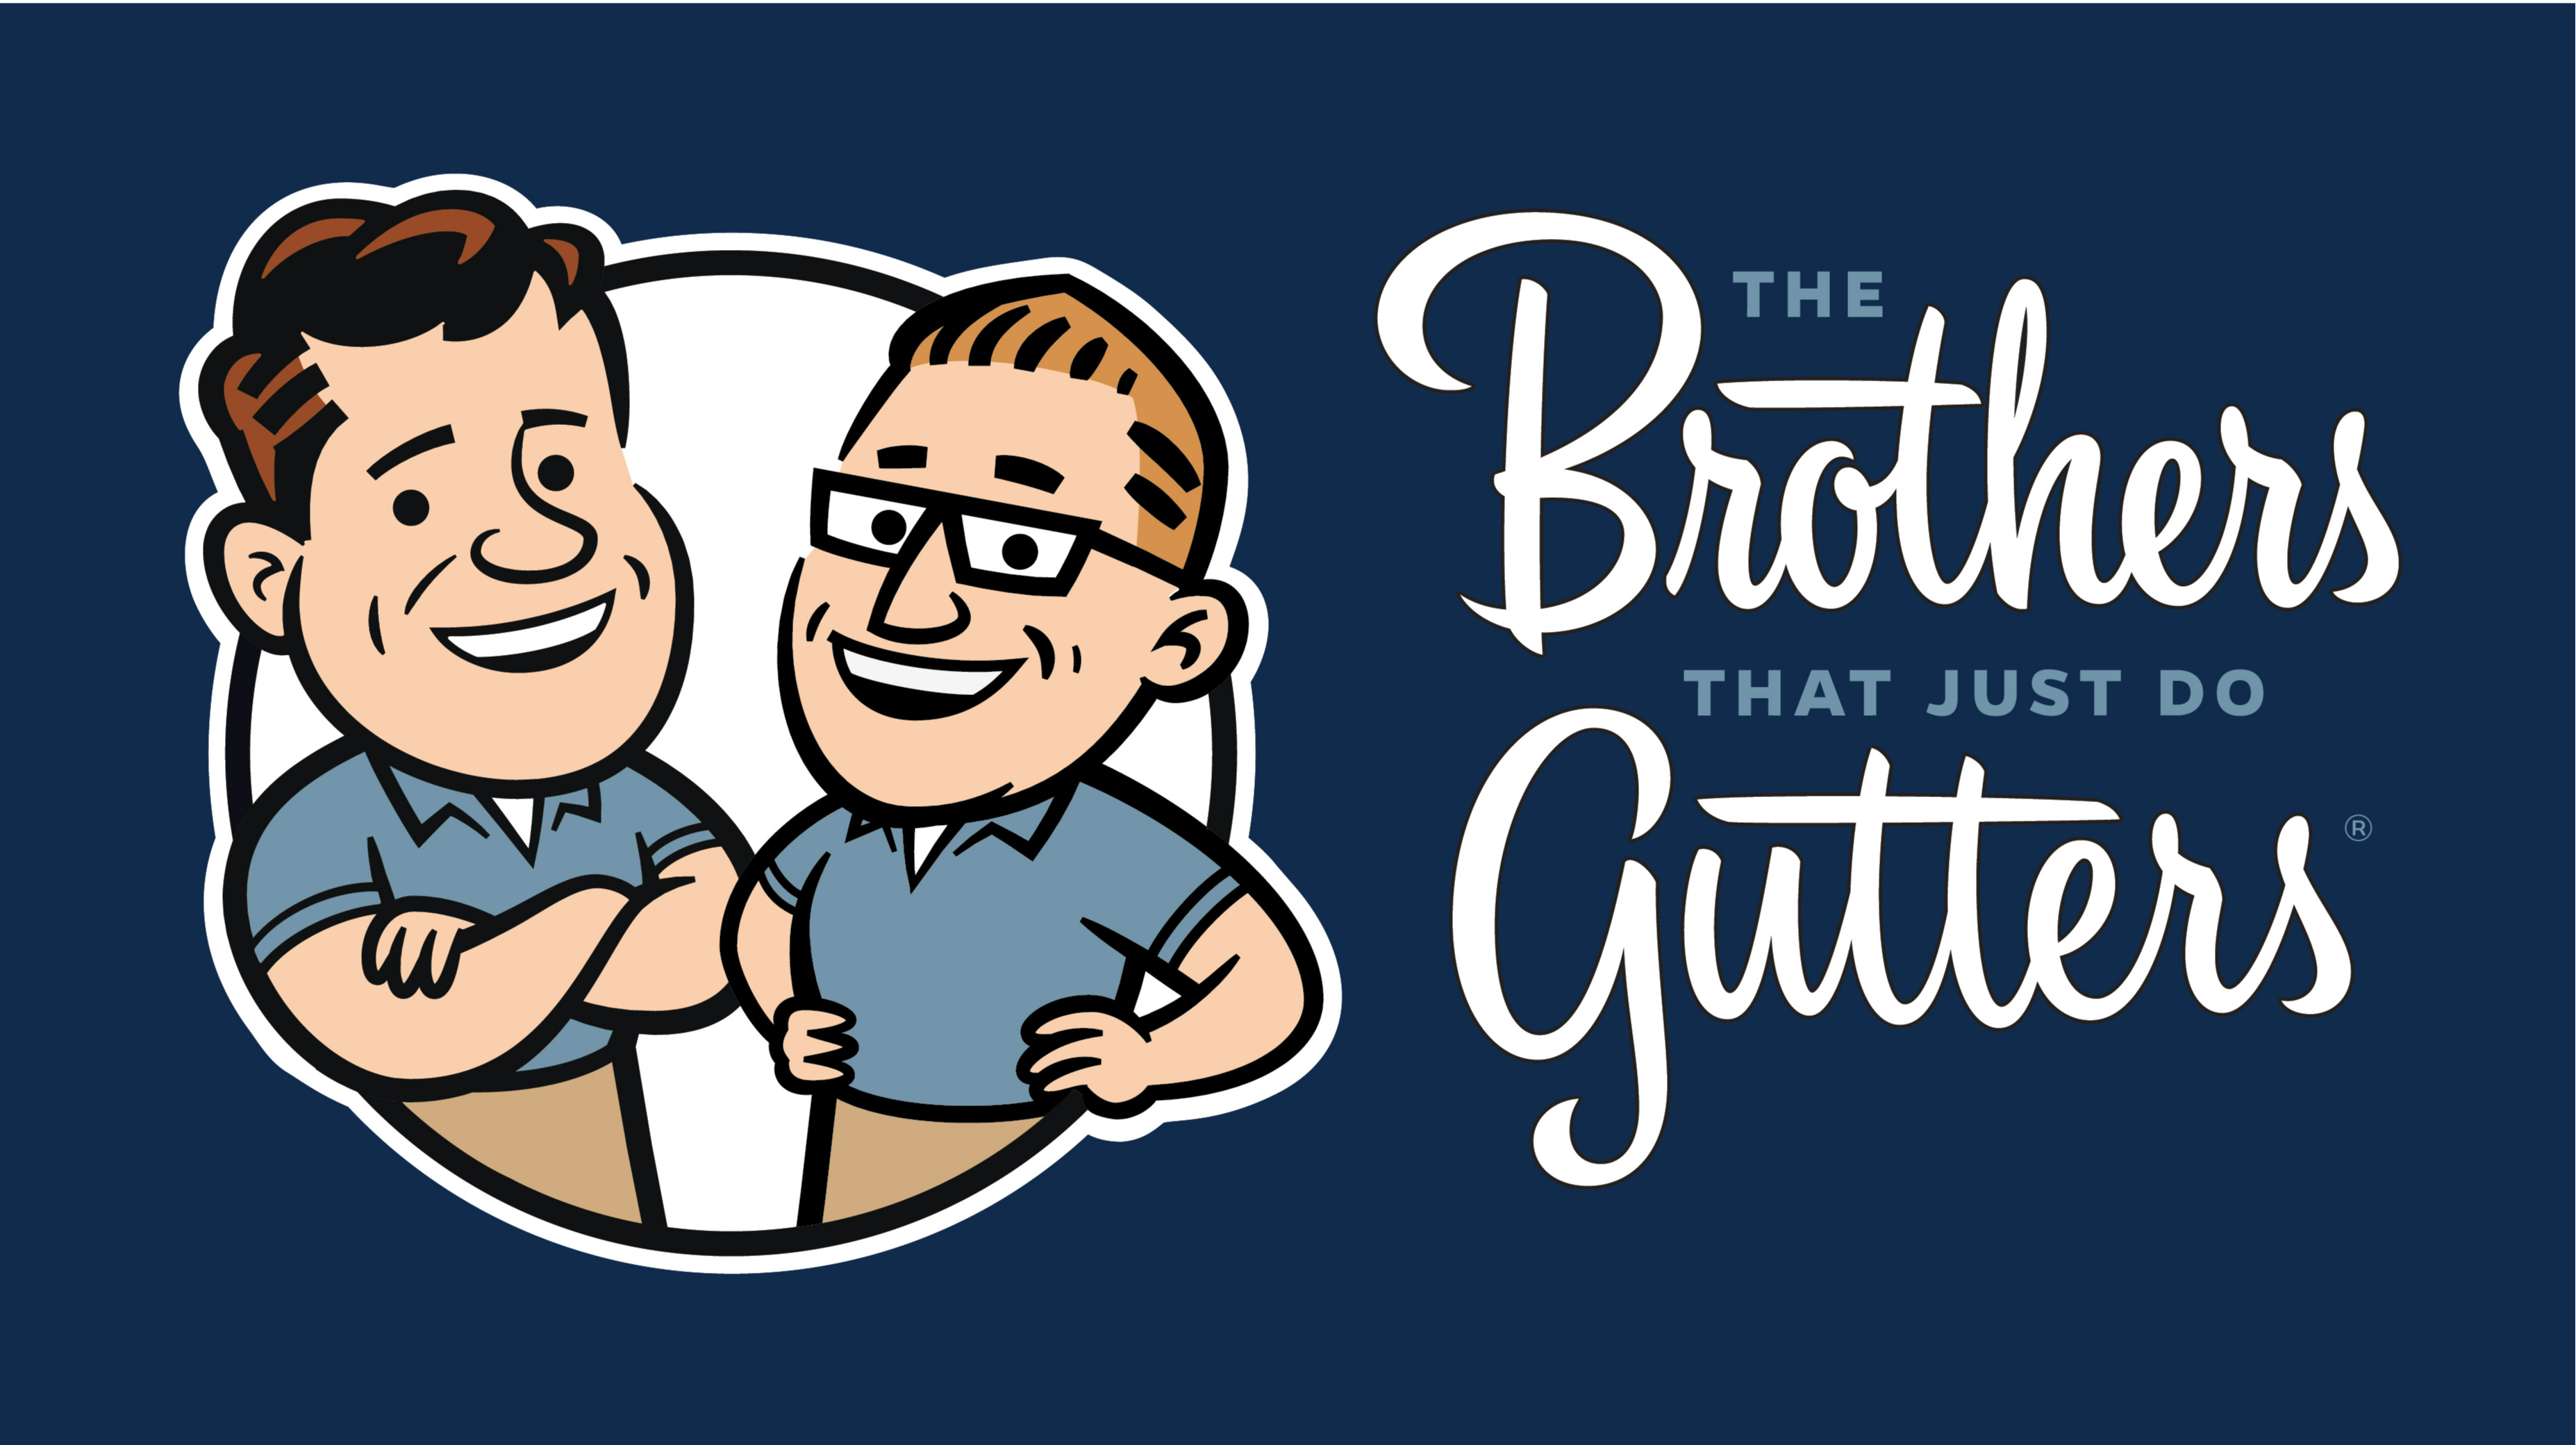 Brothers Gutters